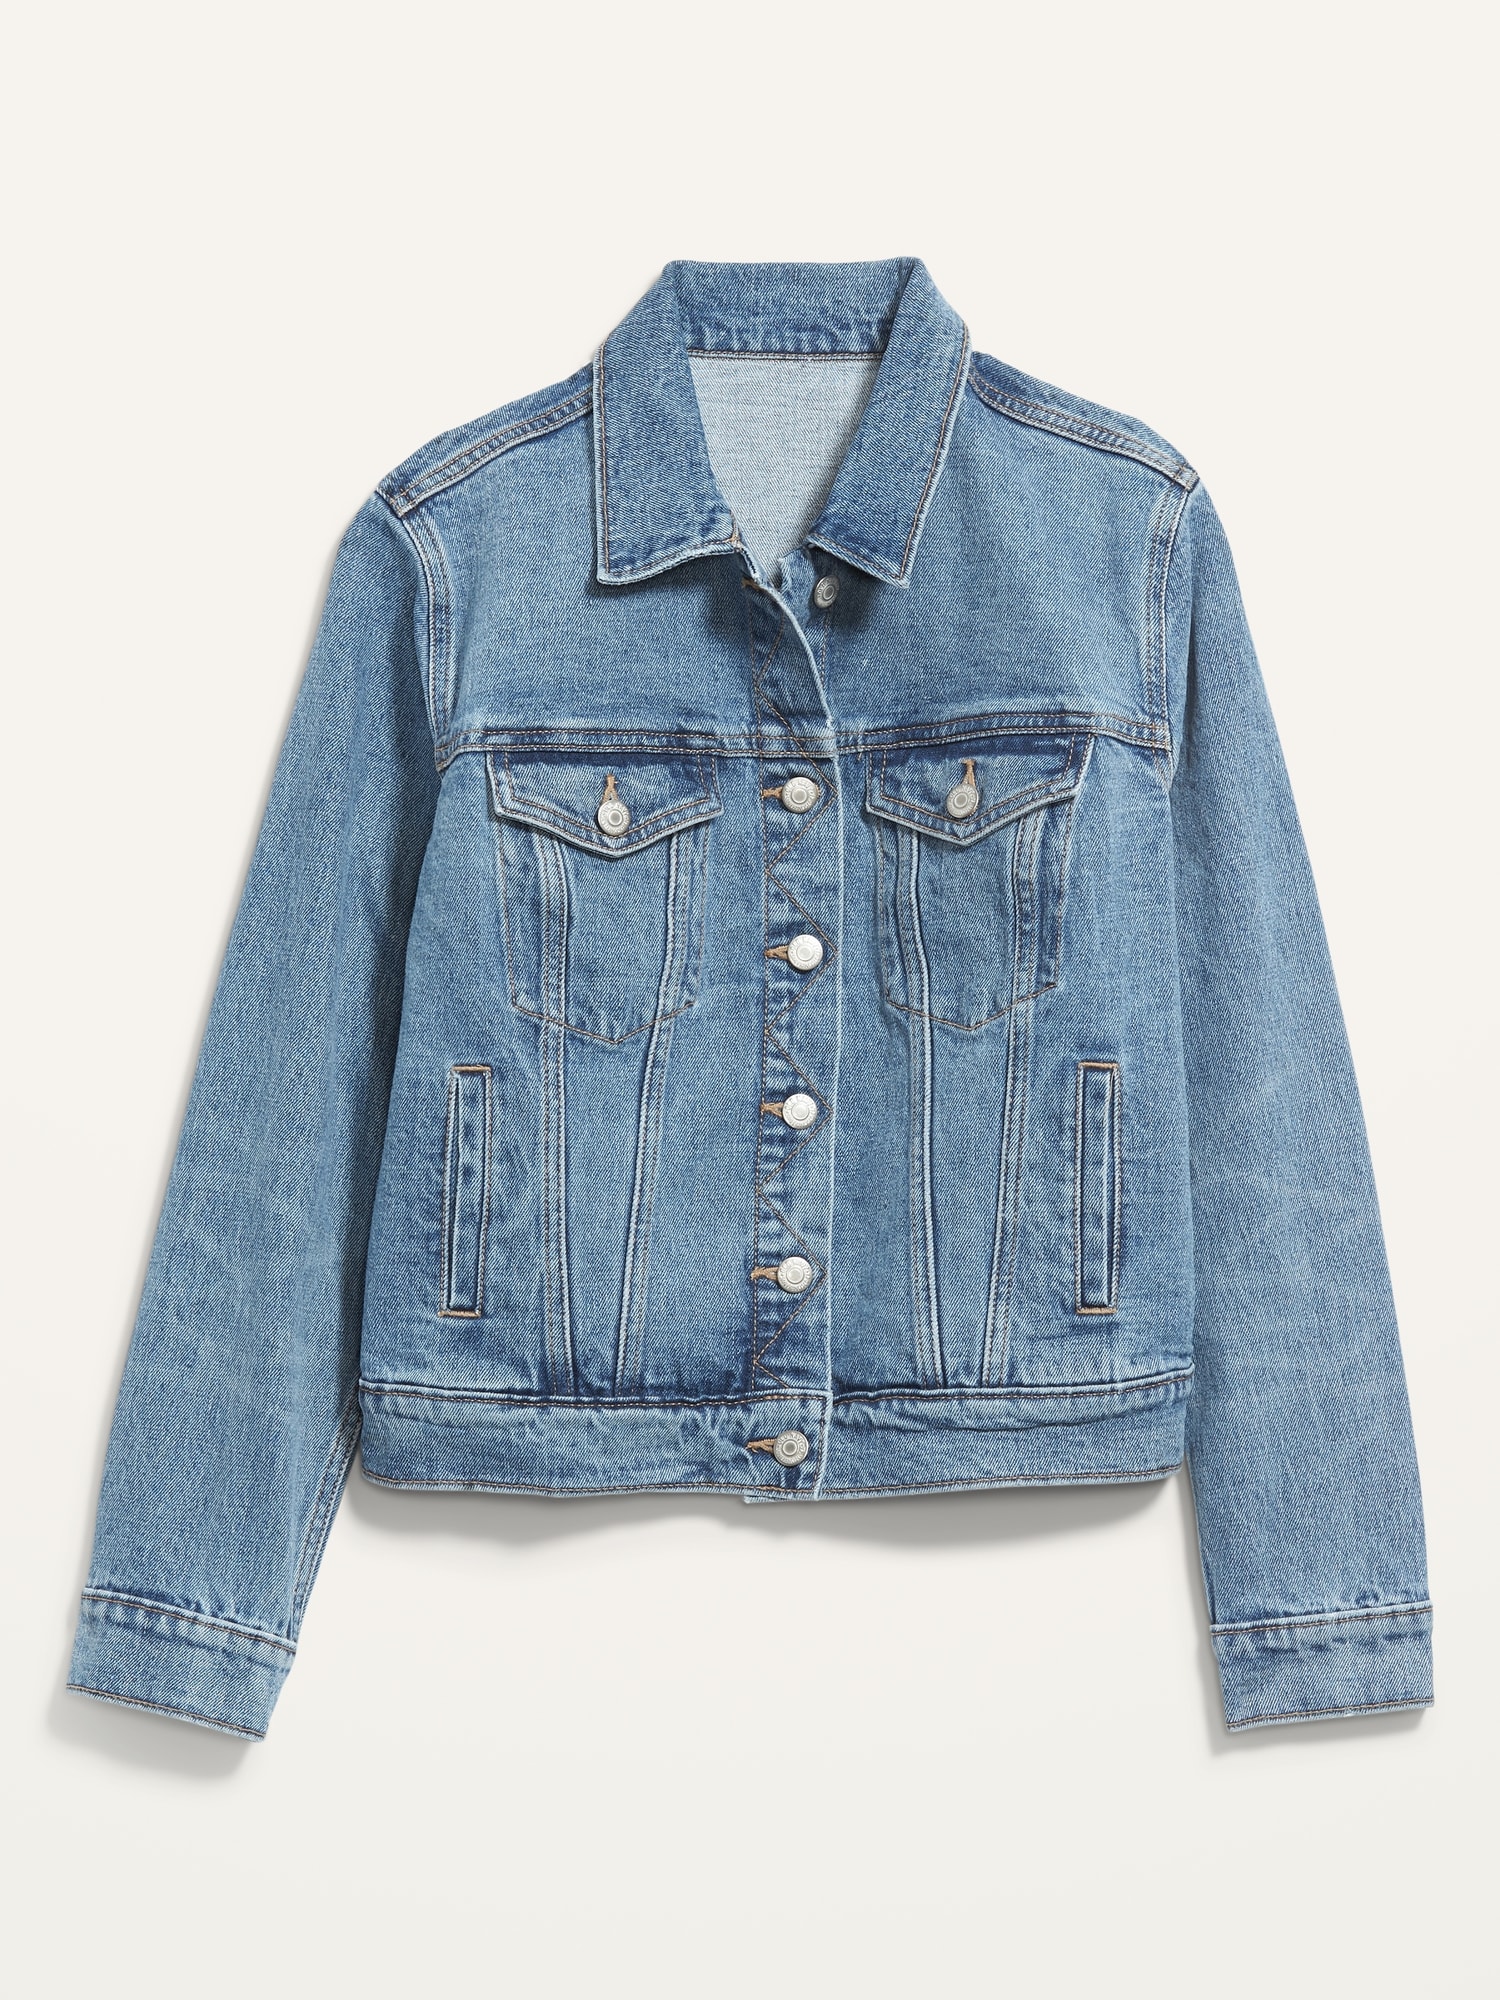 Classic Jean Jacket for Women Old Navy